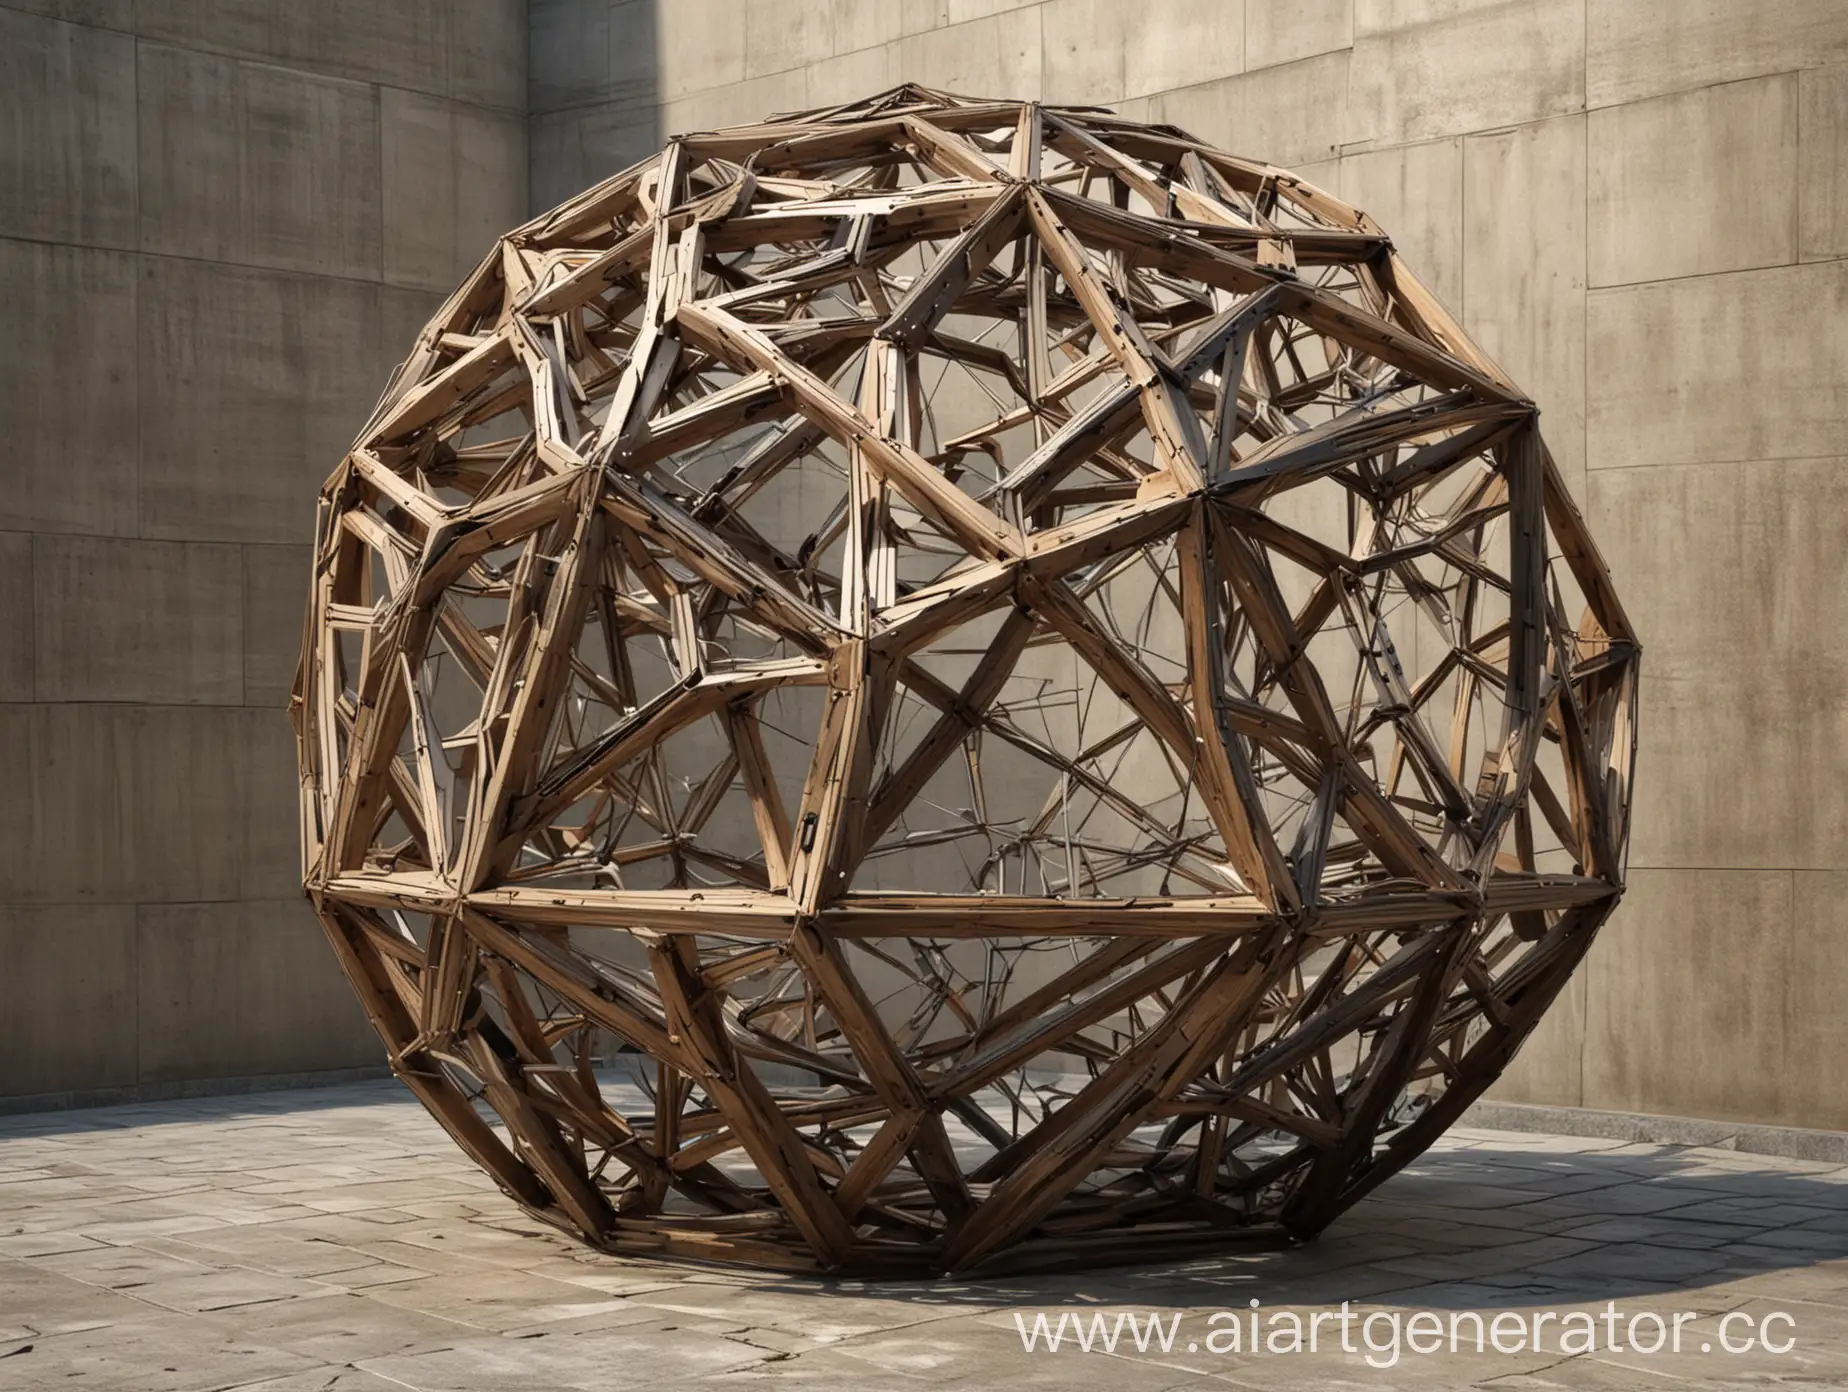 application of polyhedron geometry in architecture